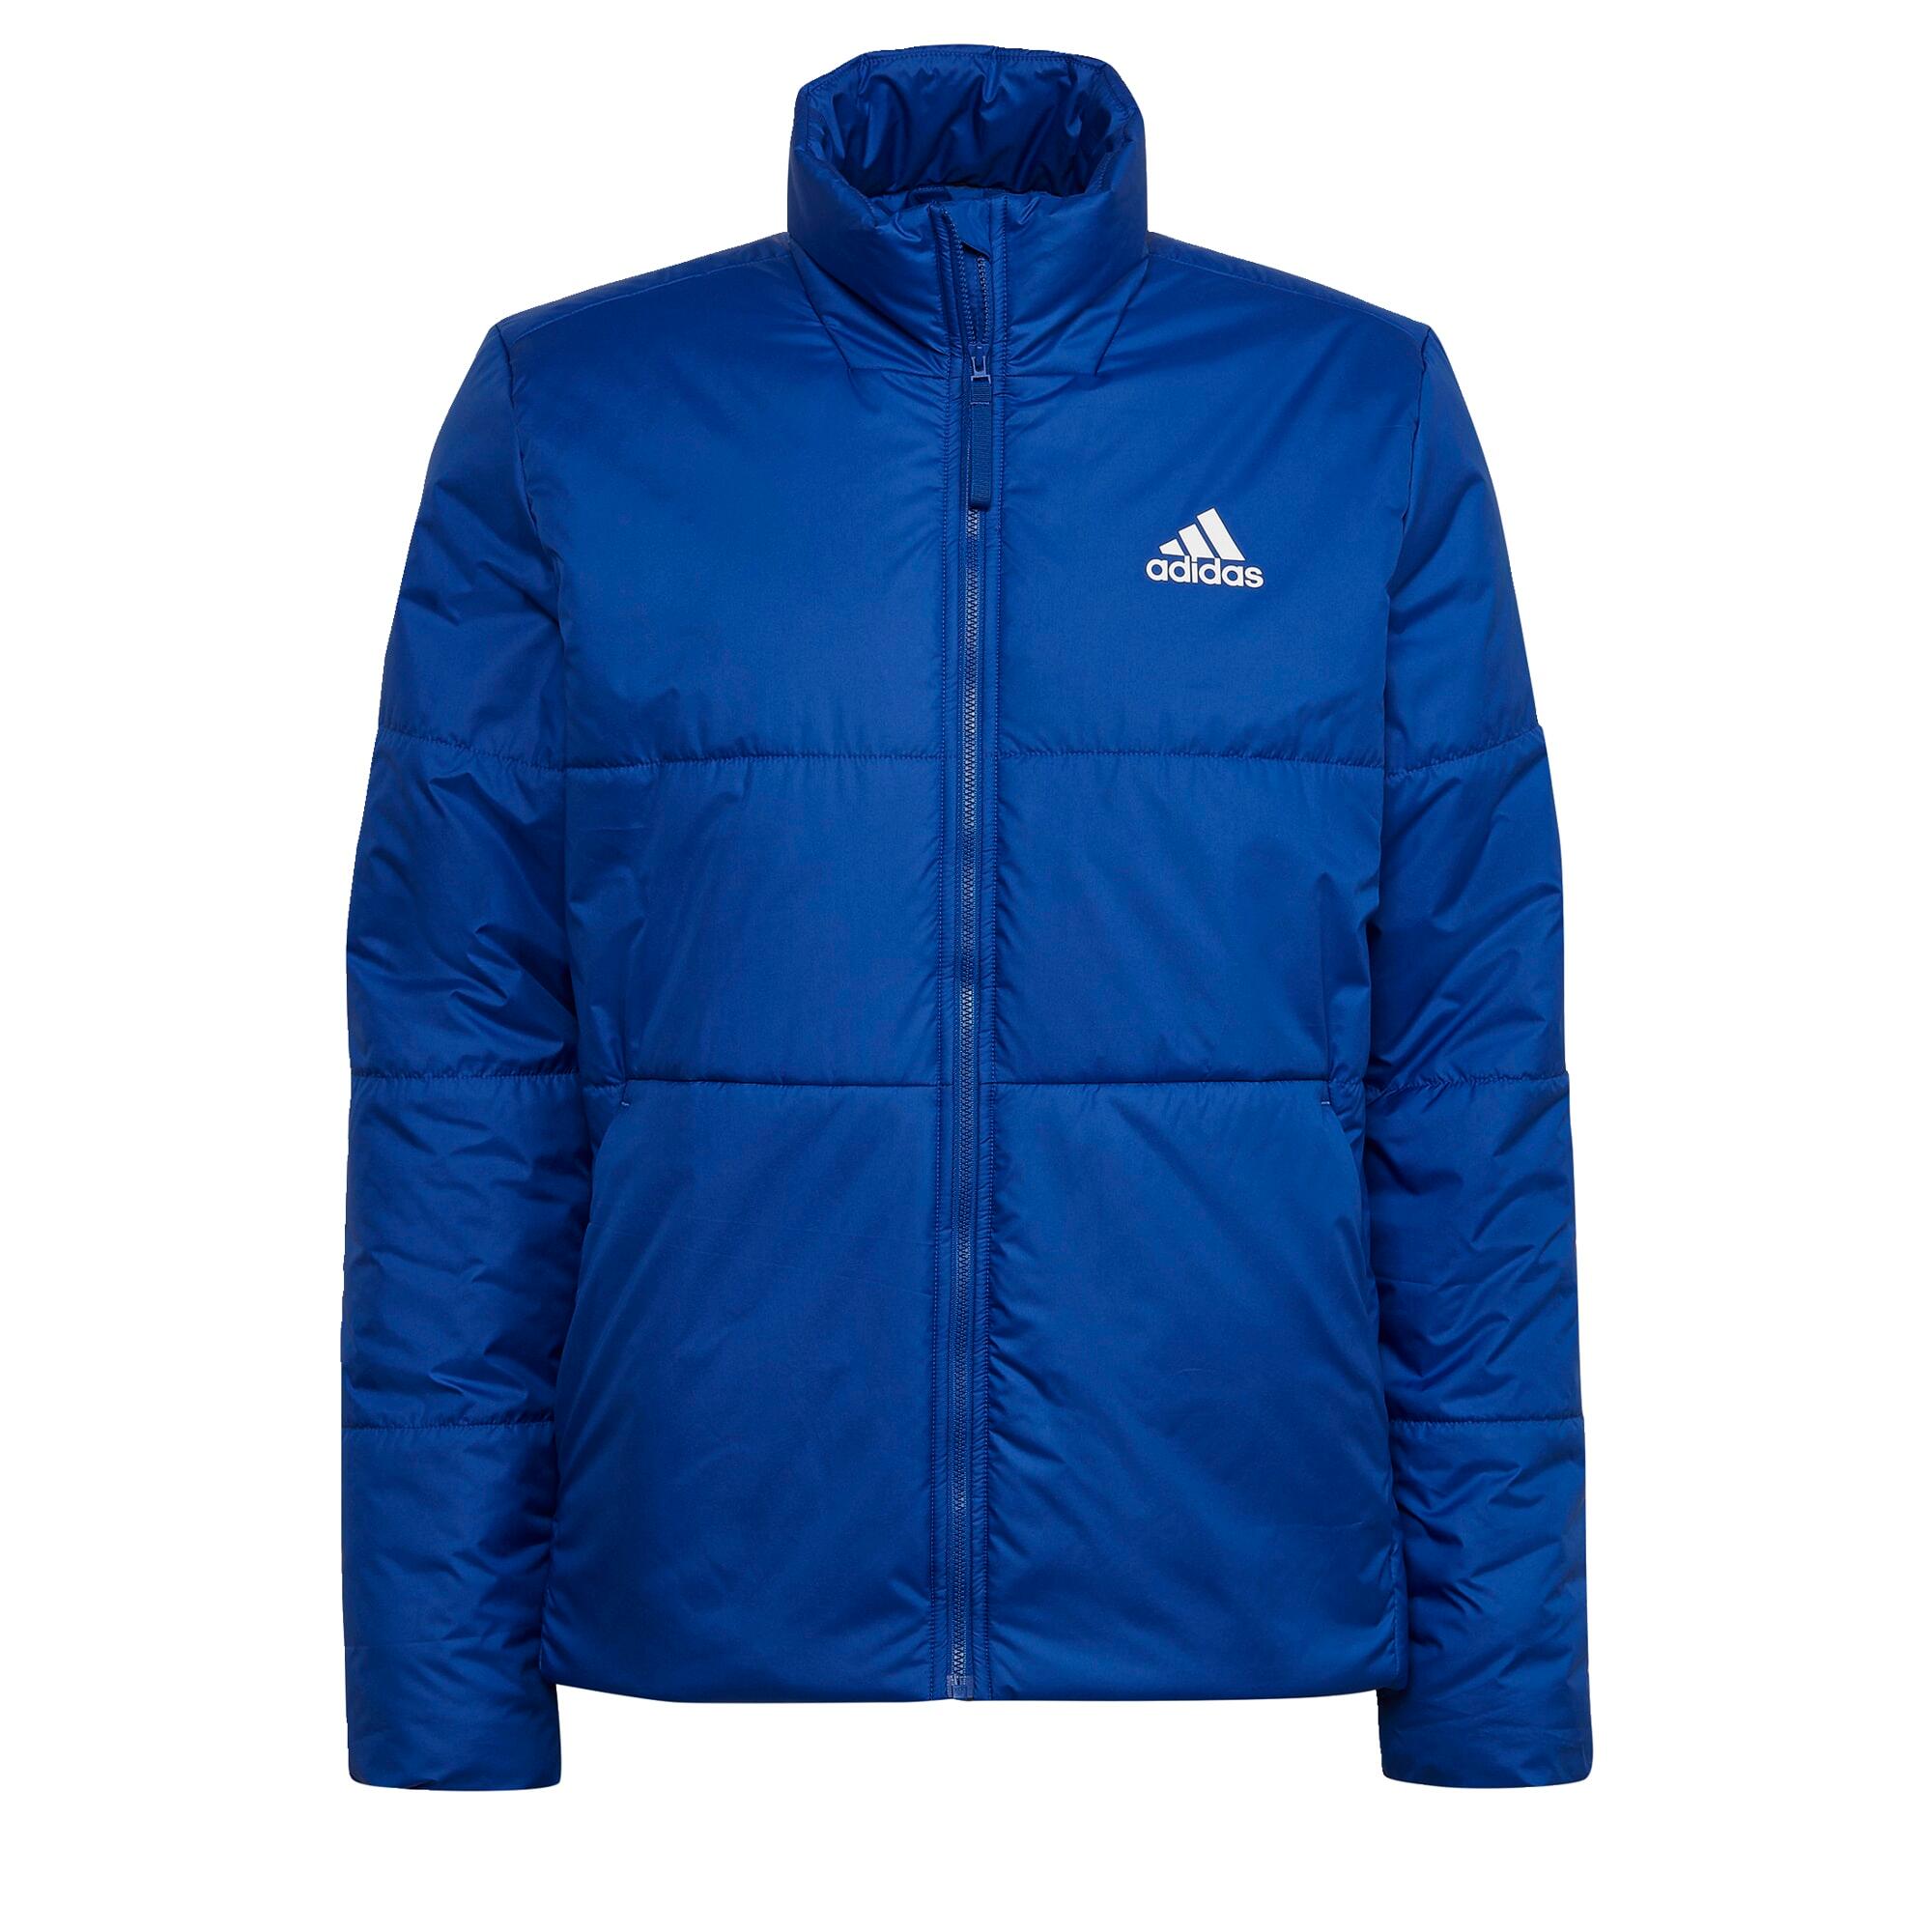 ADIDAS BSC 3-Stripes Insulated Jacket